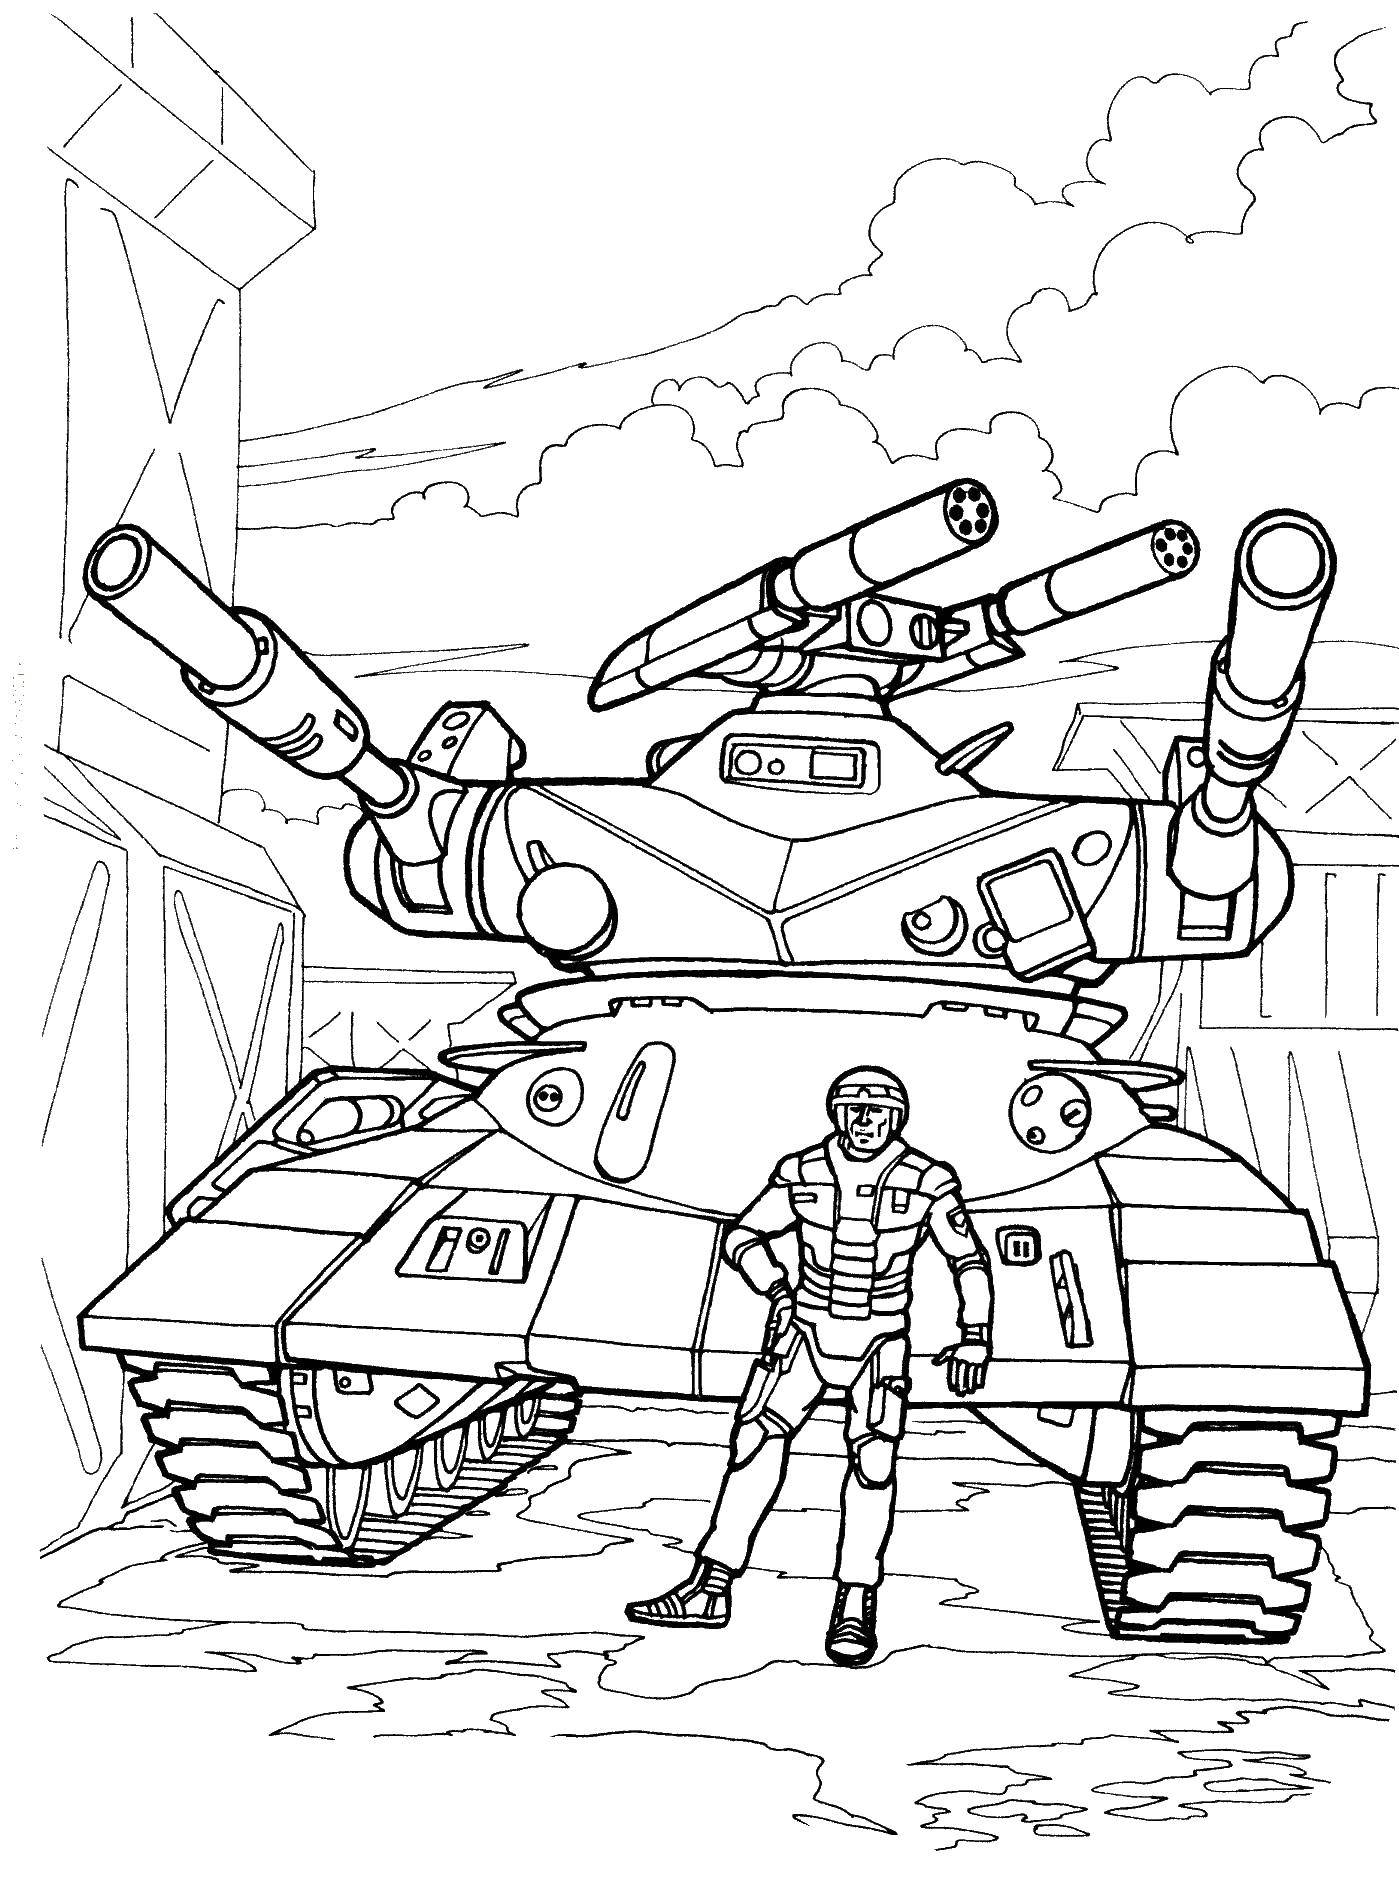 Coloring The soldier in the tank. Category military. Tags:  soldier, tank, military.